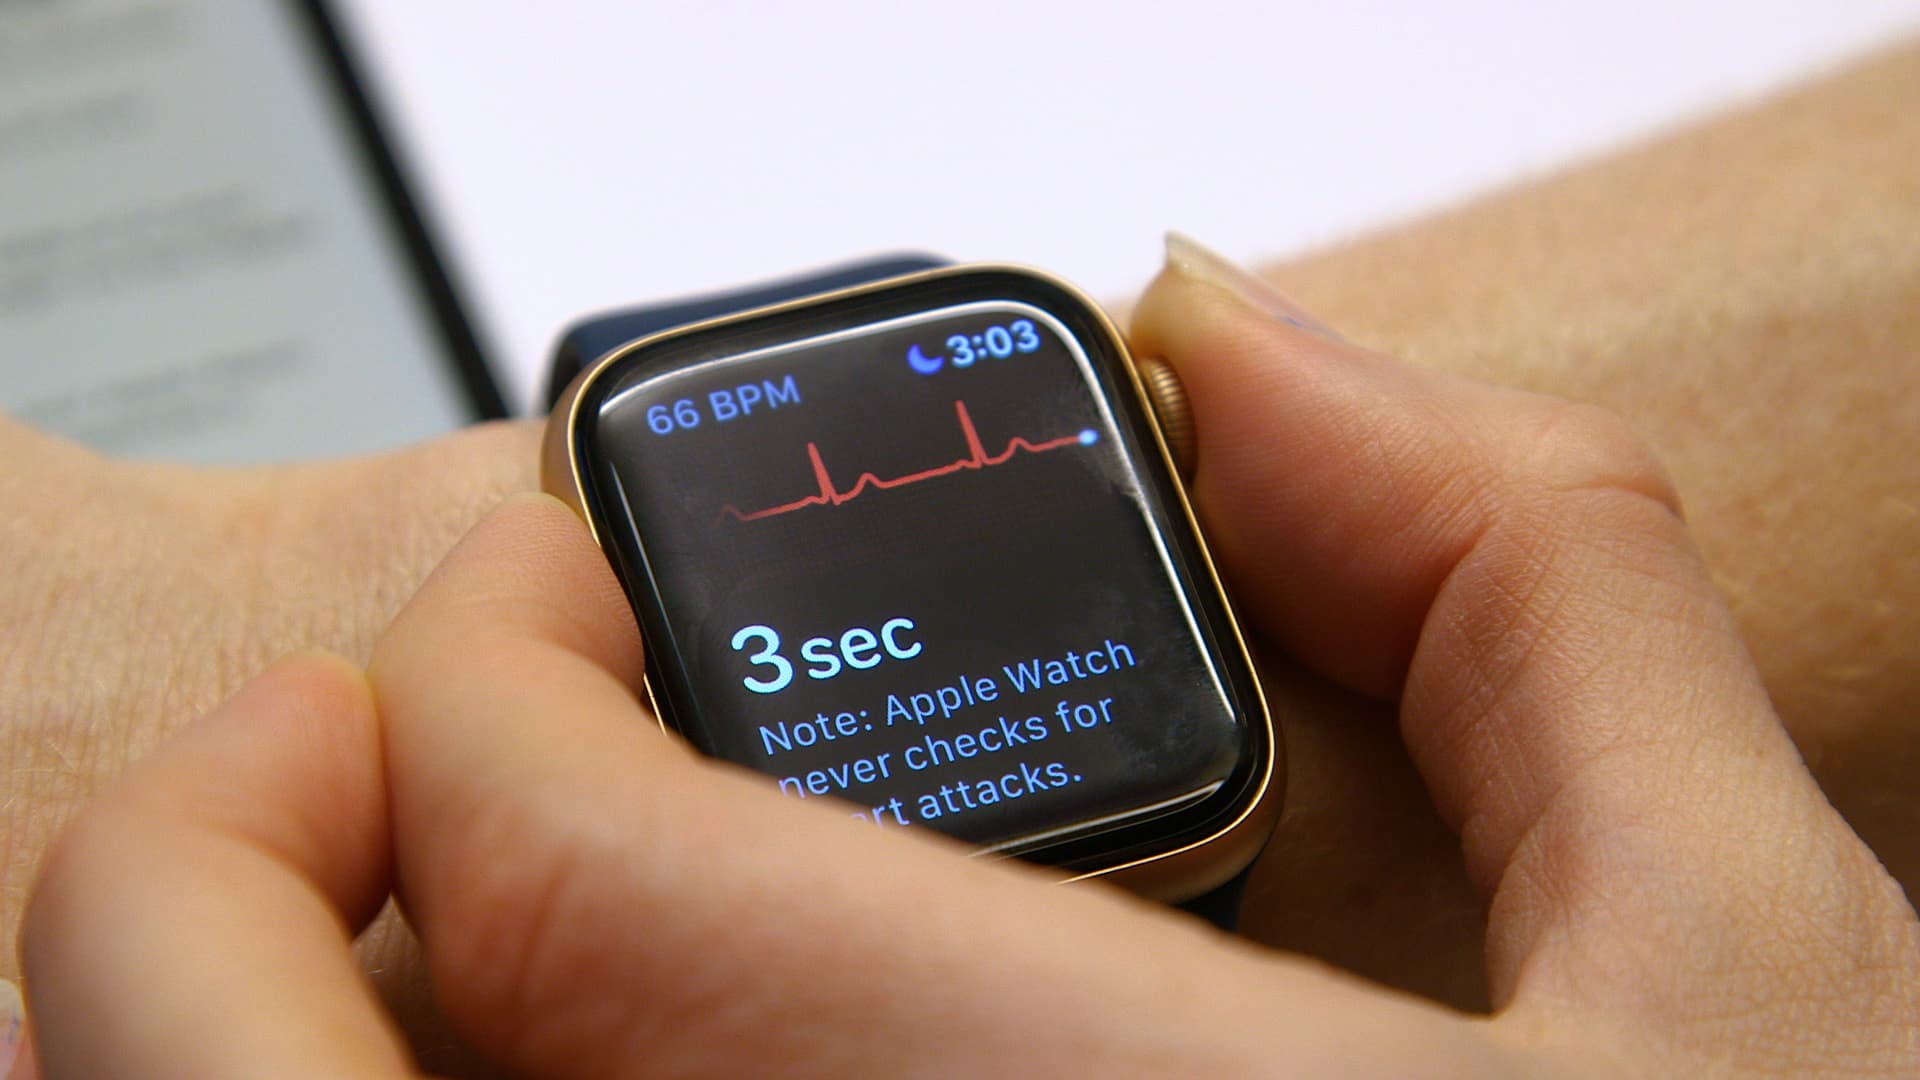 How to Use the ECG App on Your Apple Watch to Monitor Your Heart Health